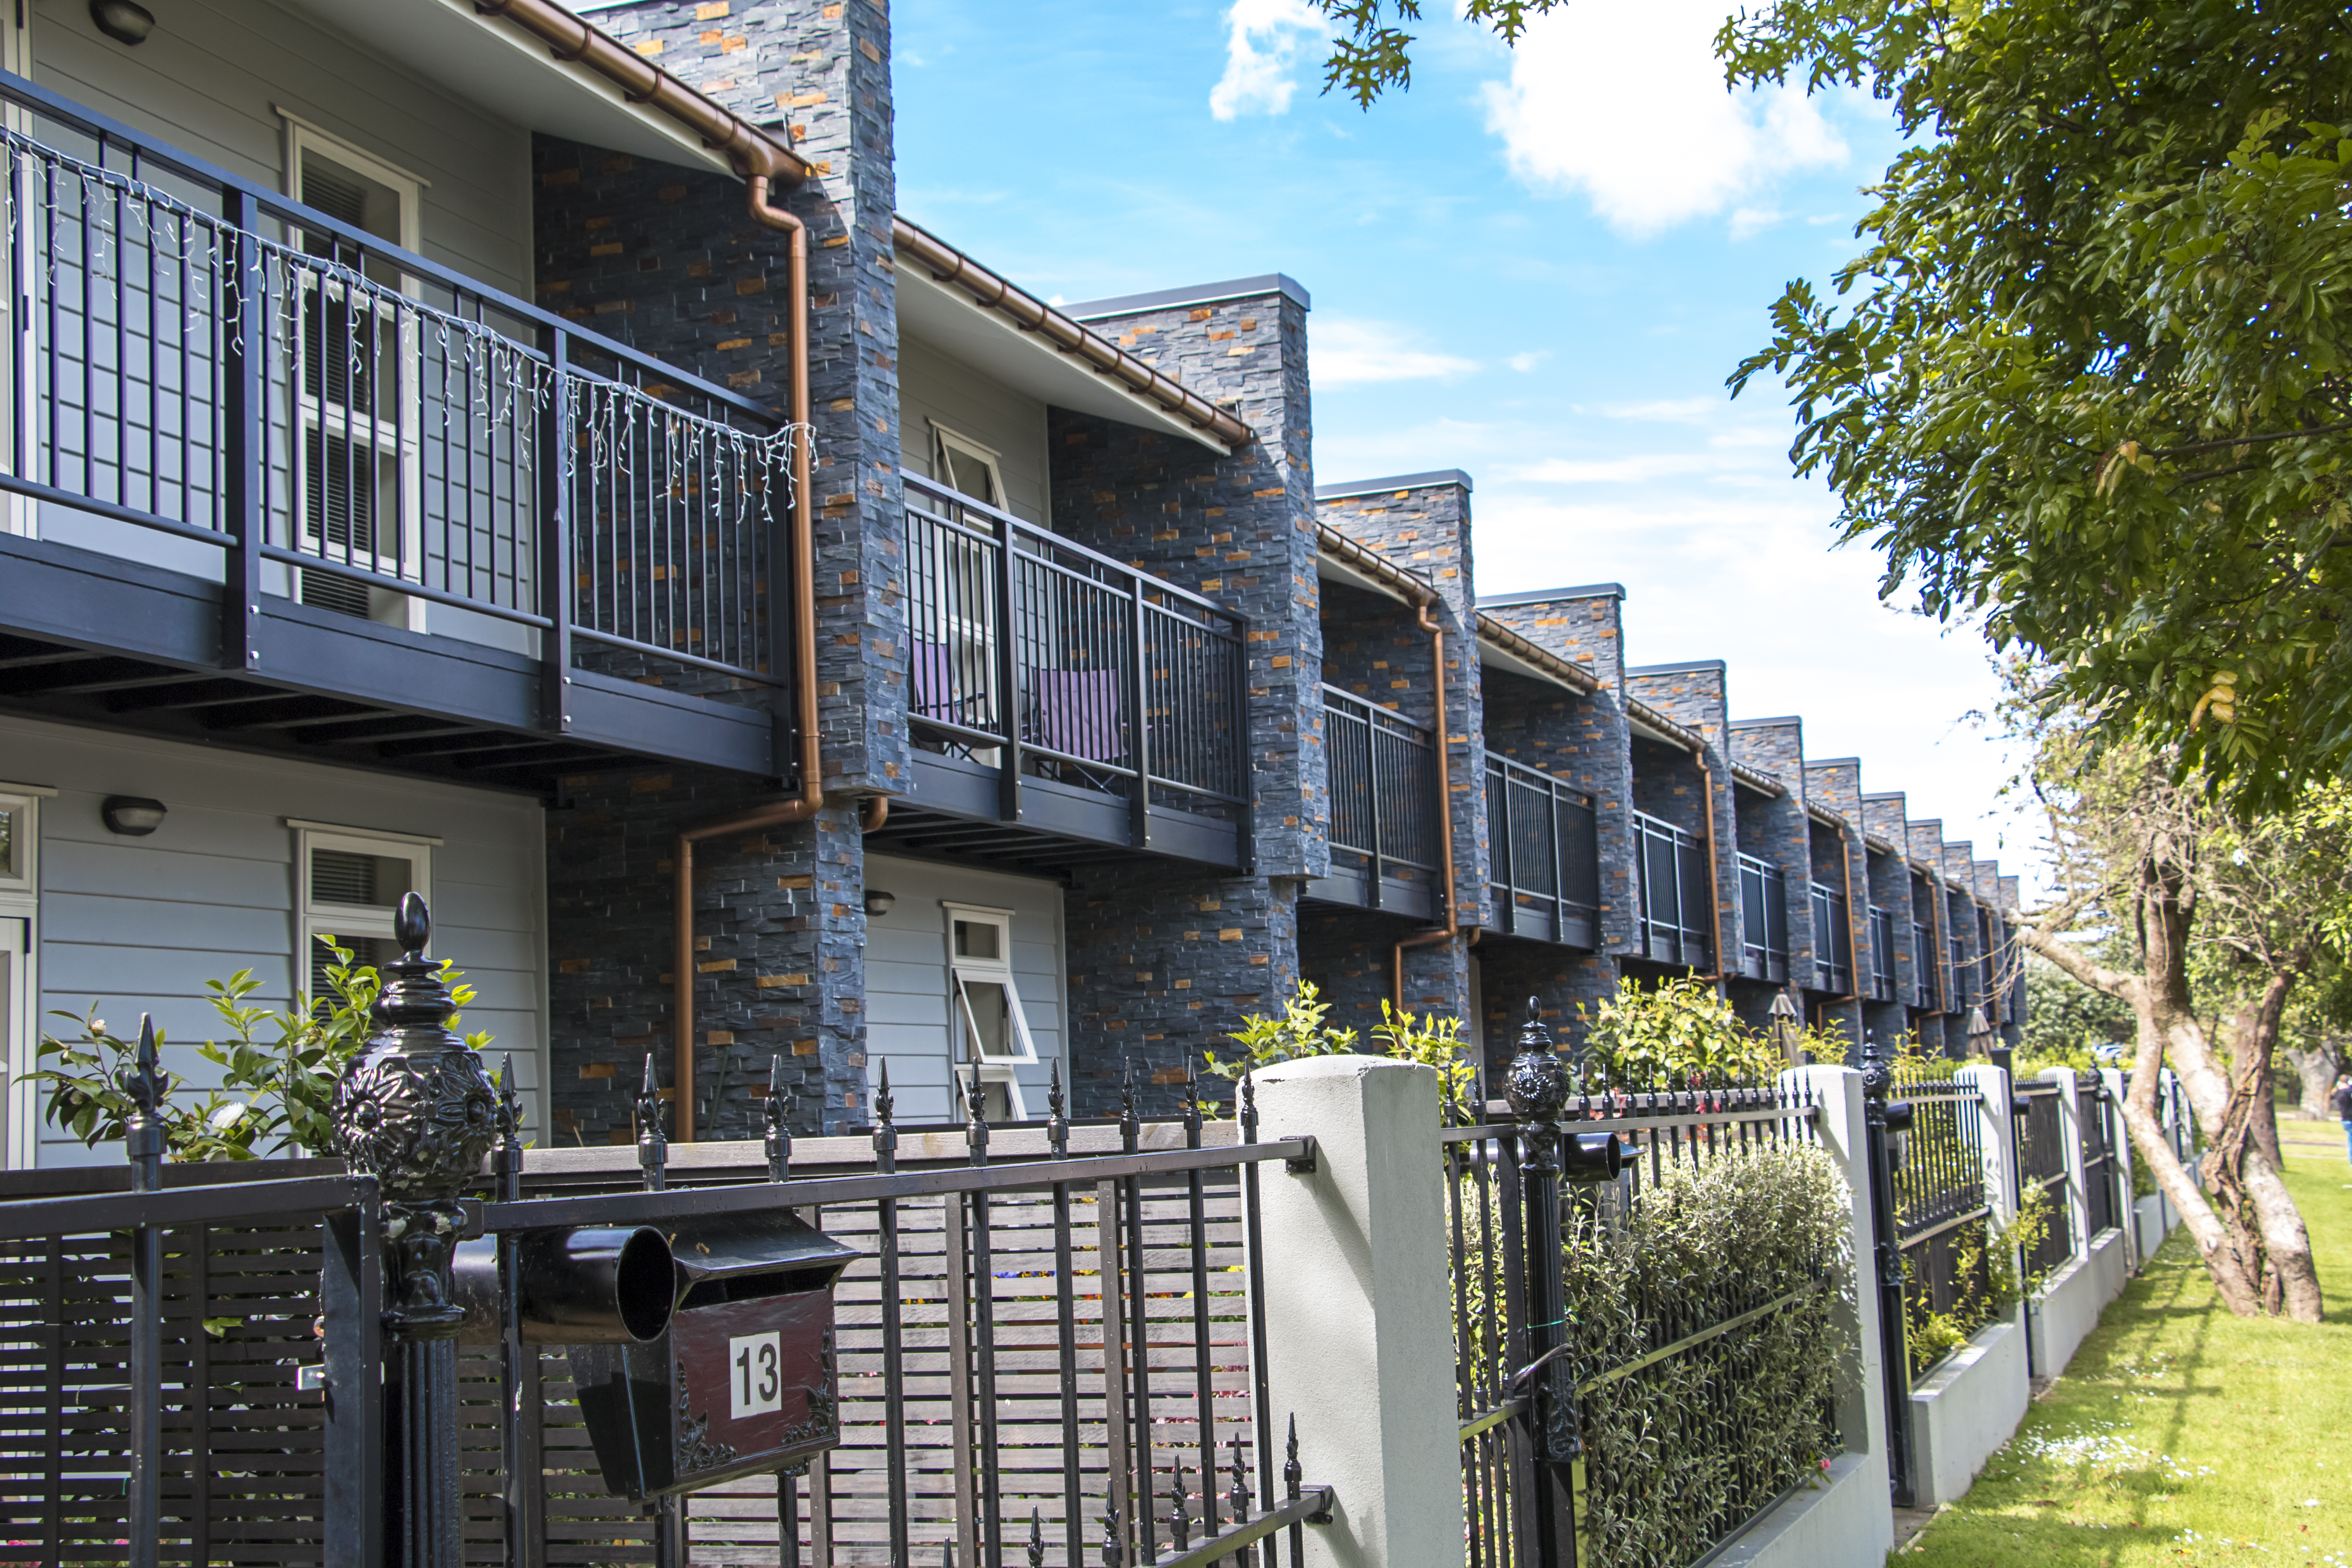 Ellerslie apartments with Marley copper spouting using Marley Typhoon and RP80 downpipe